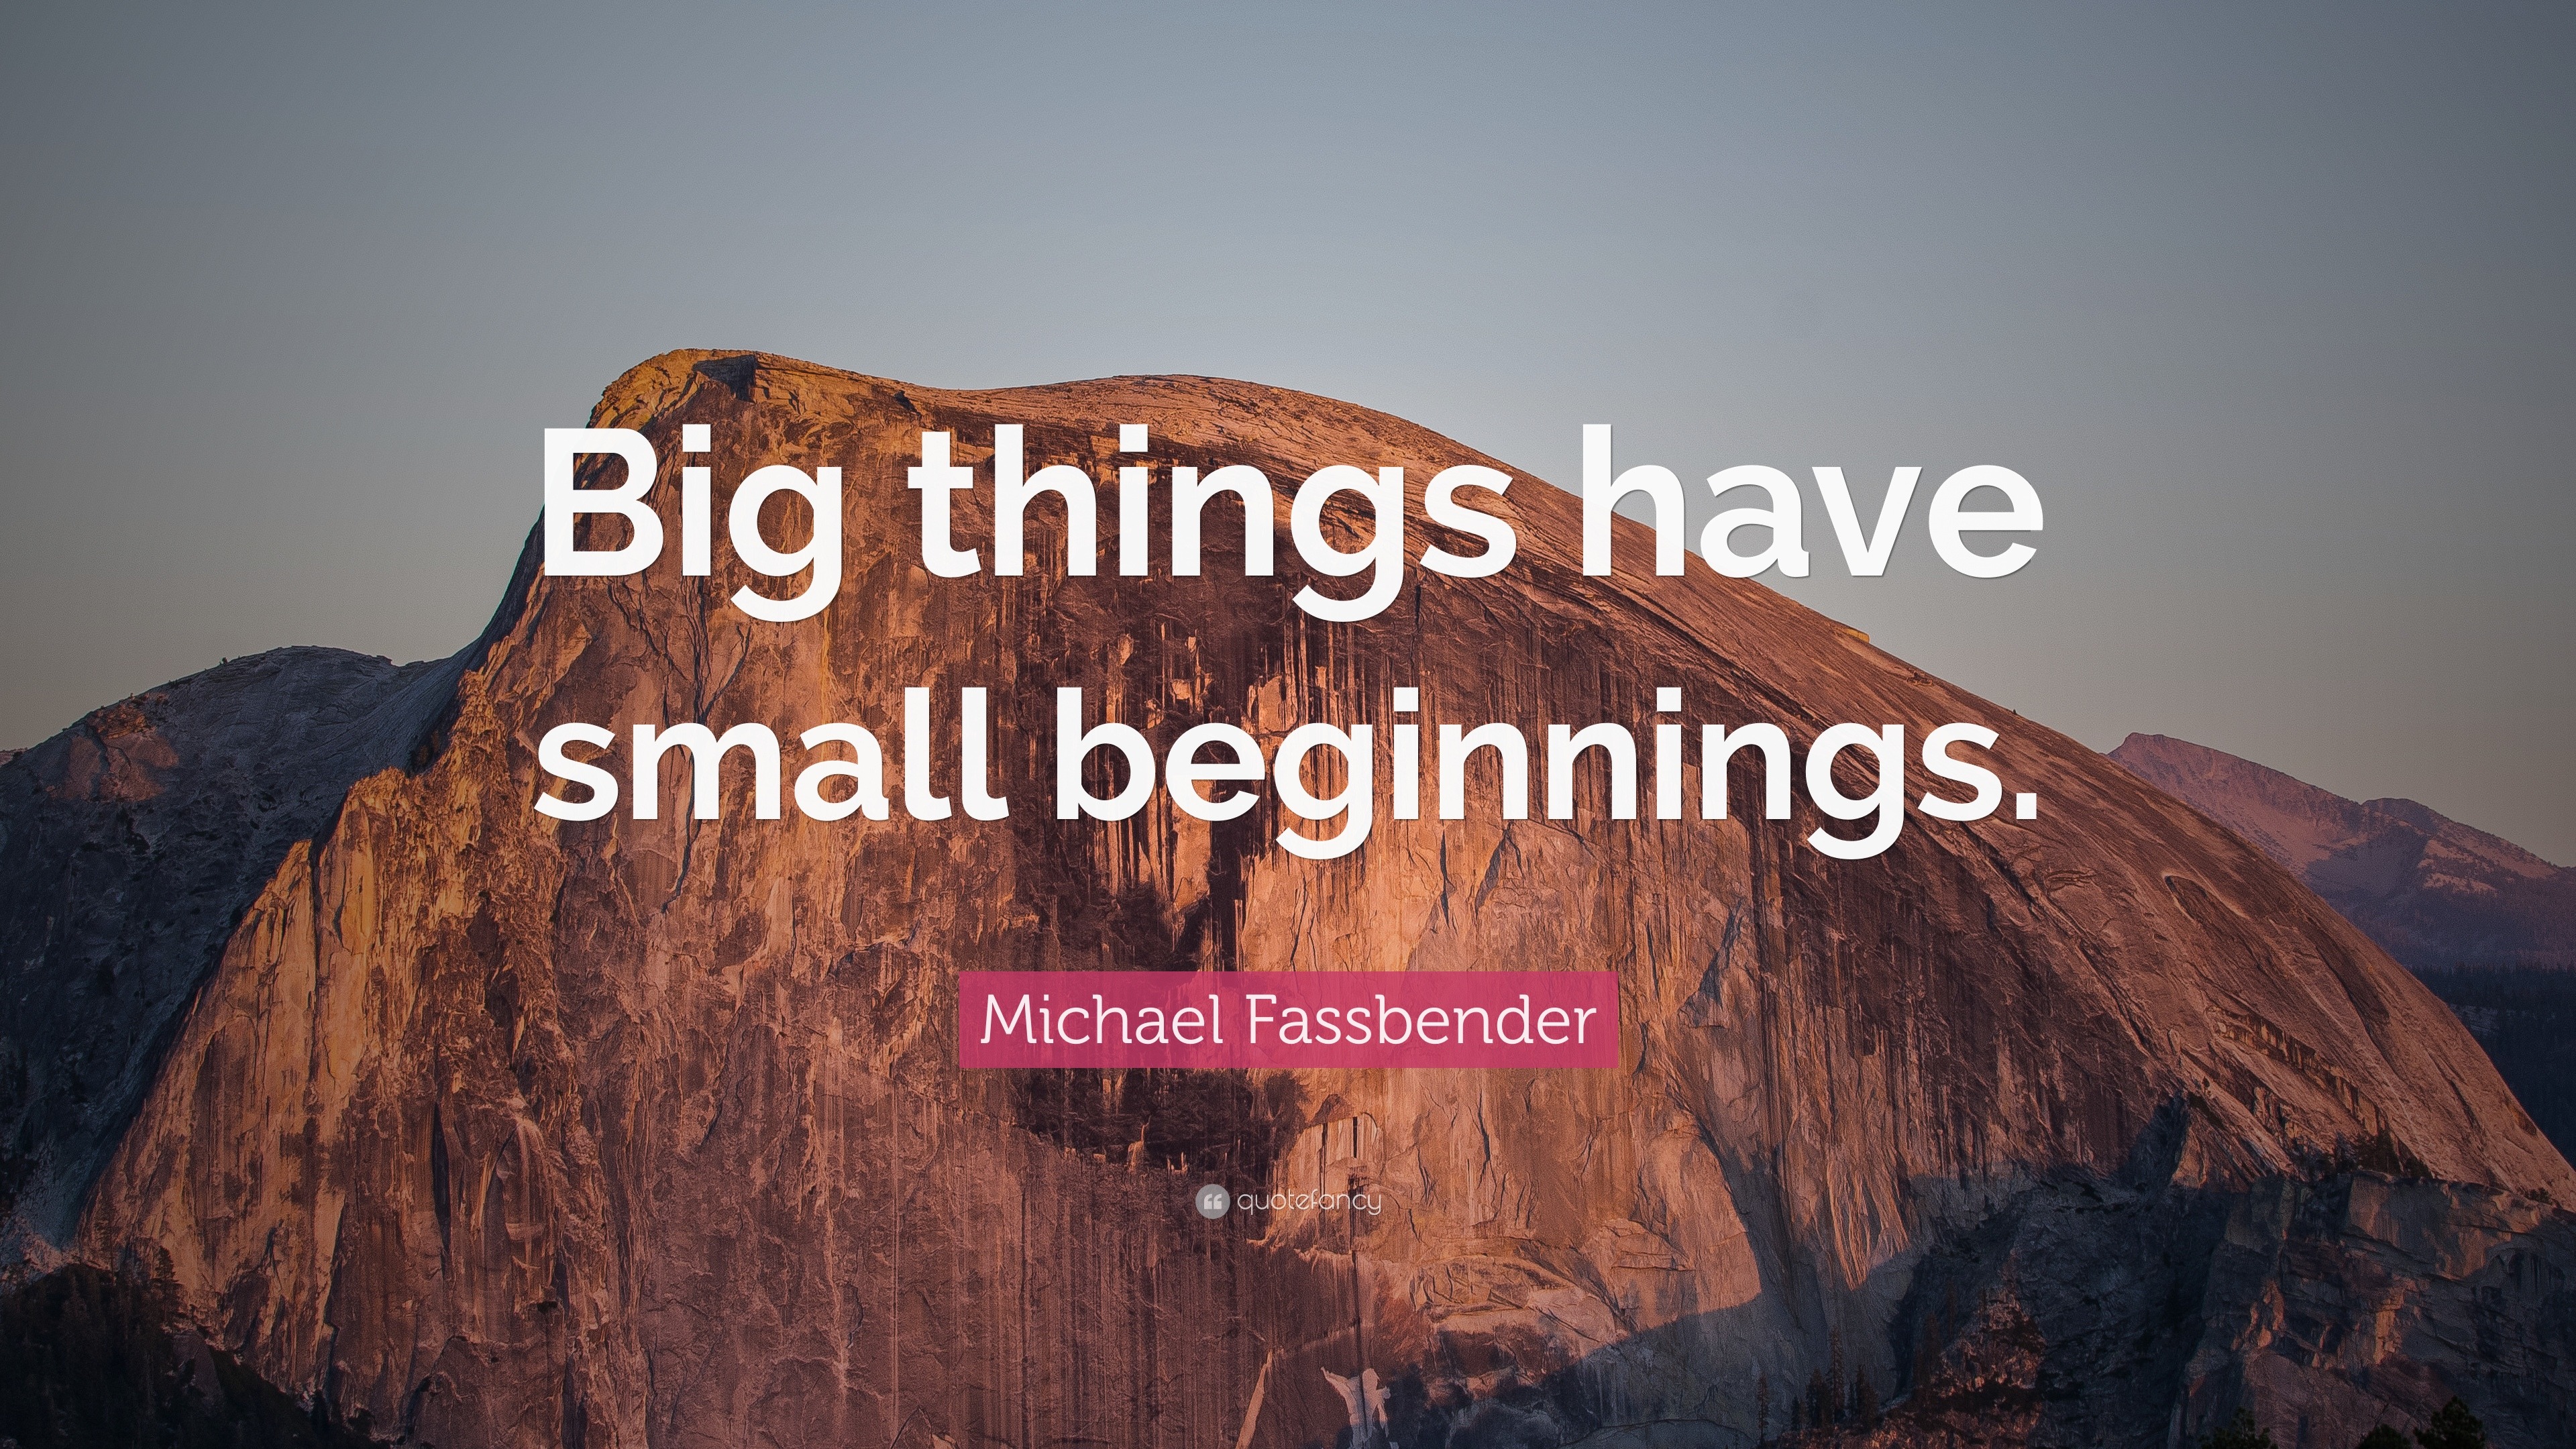 Michael Fassbender Quote “Big things have small beginnings.” (12